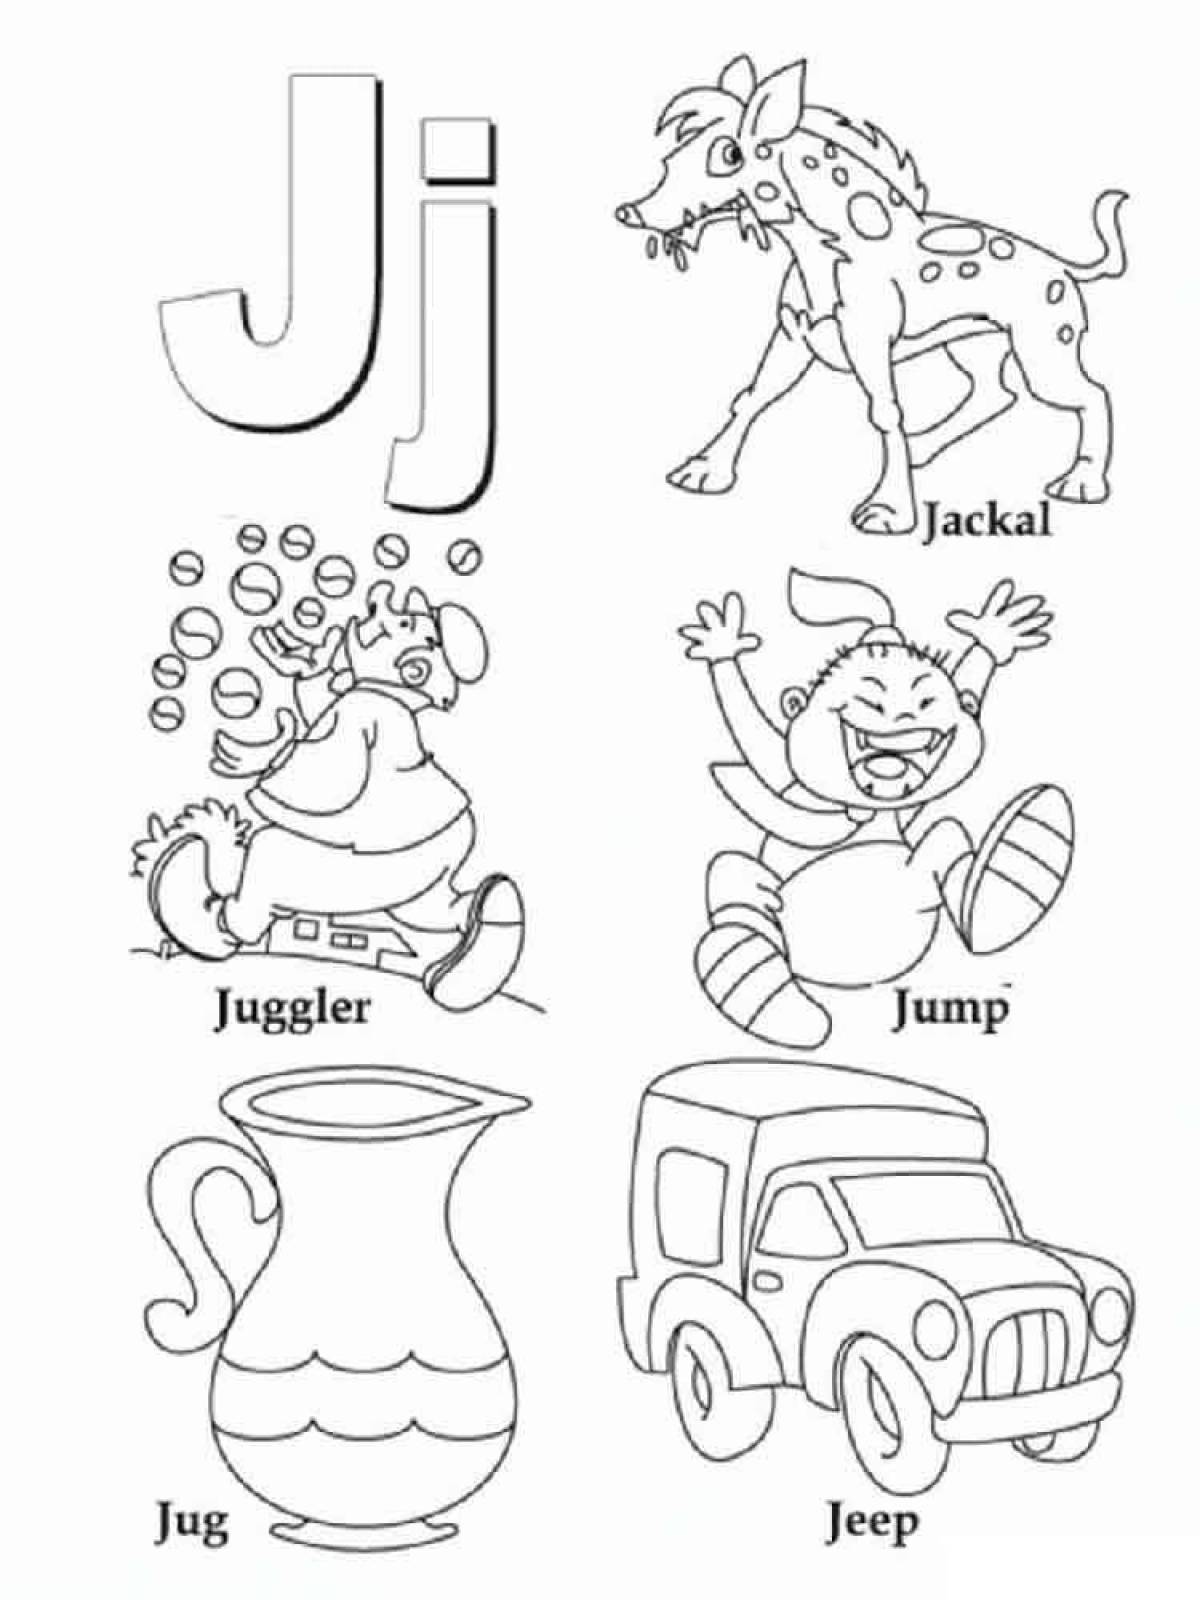 Live english alphabet coloring page